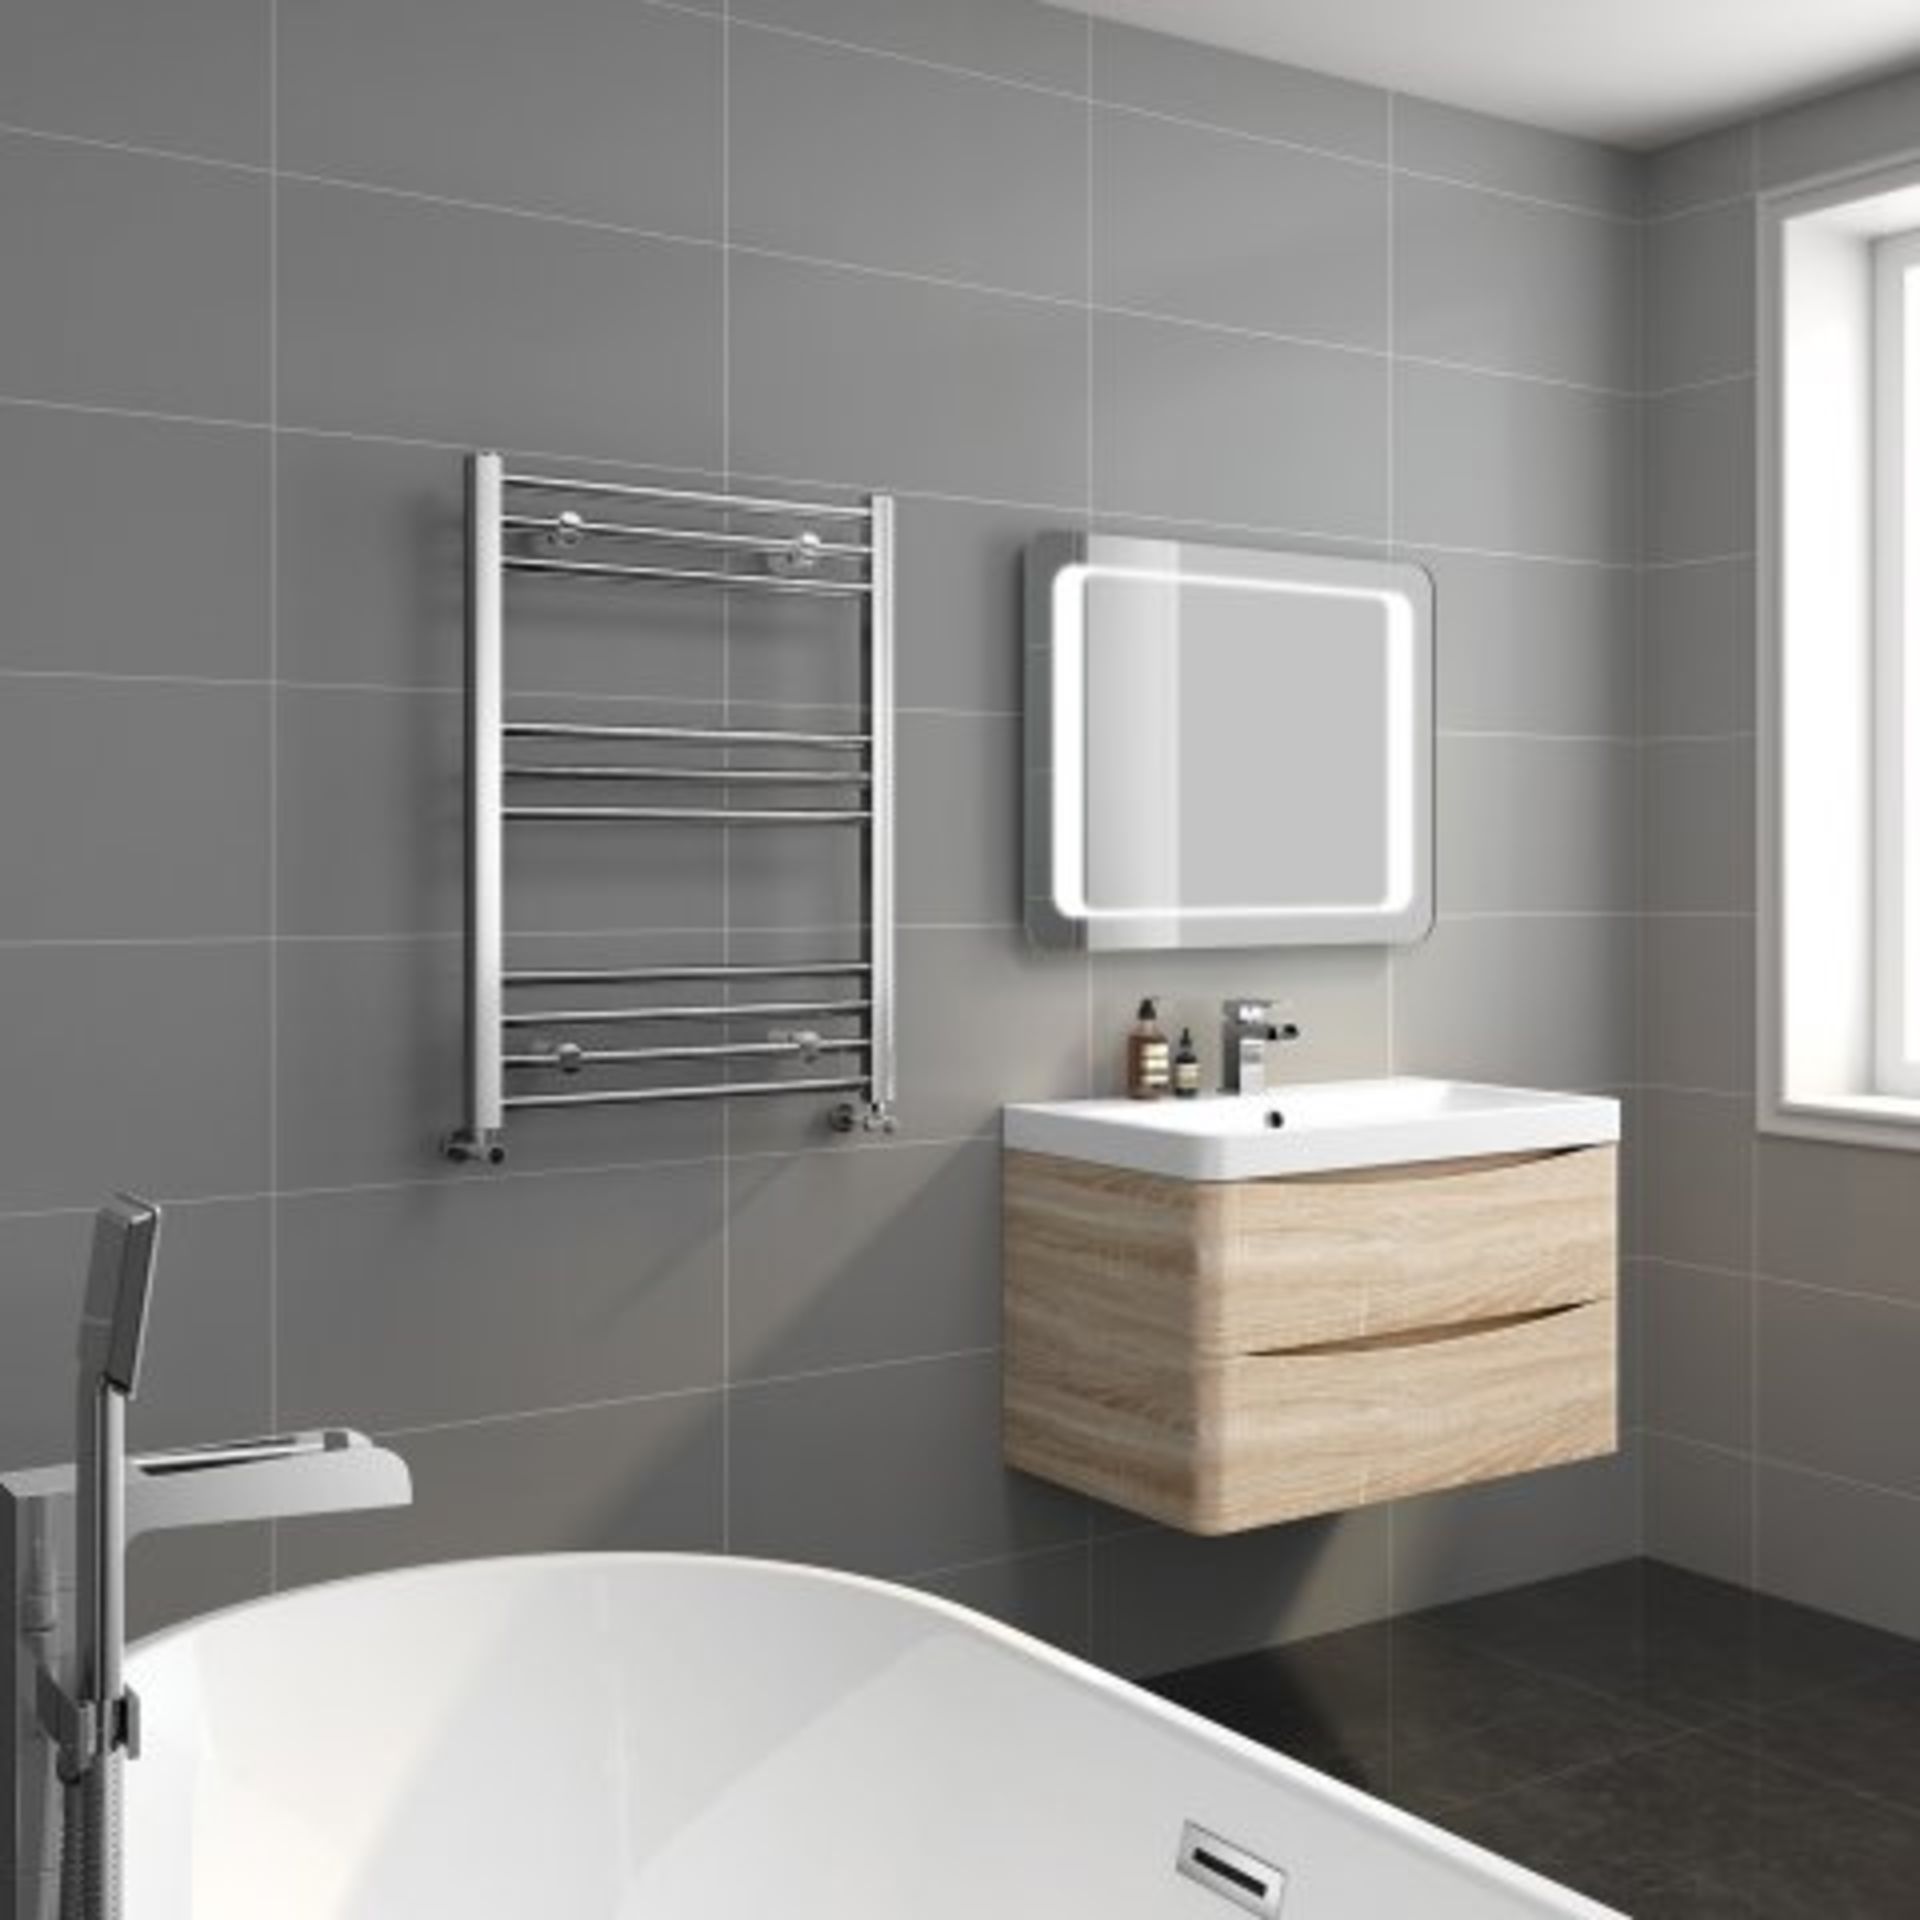 (N195) 1800x500mm Mirrored Anthracite Double Oval Panel Radiator RRP £499.99. Designer Touch This - Image 2 of 3